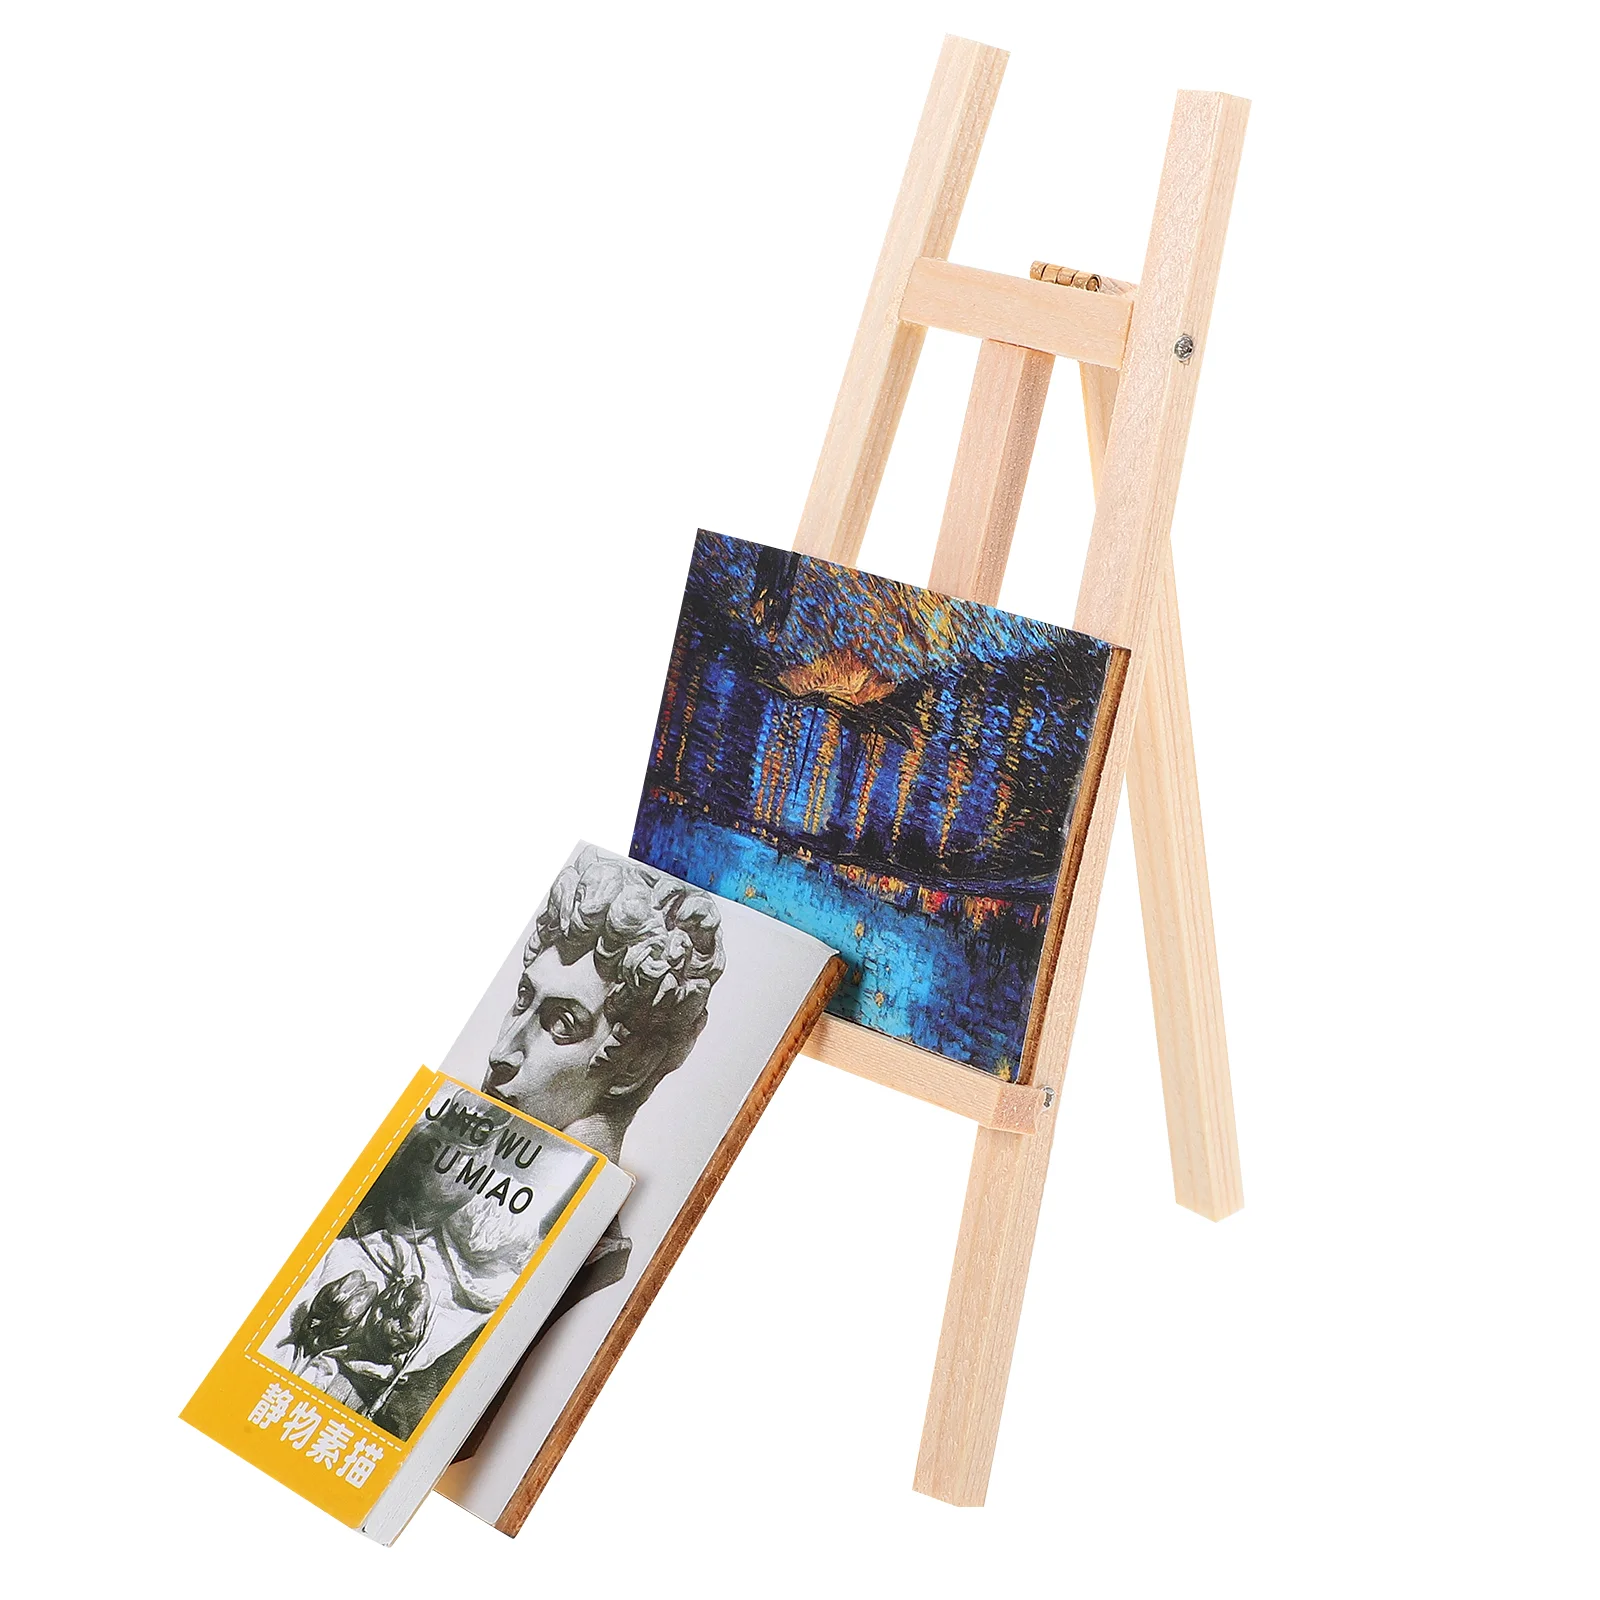 House Decorative Painting Mini Adornment Miniature Easel Wooden Board Furniture Small Model